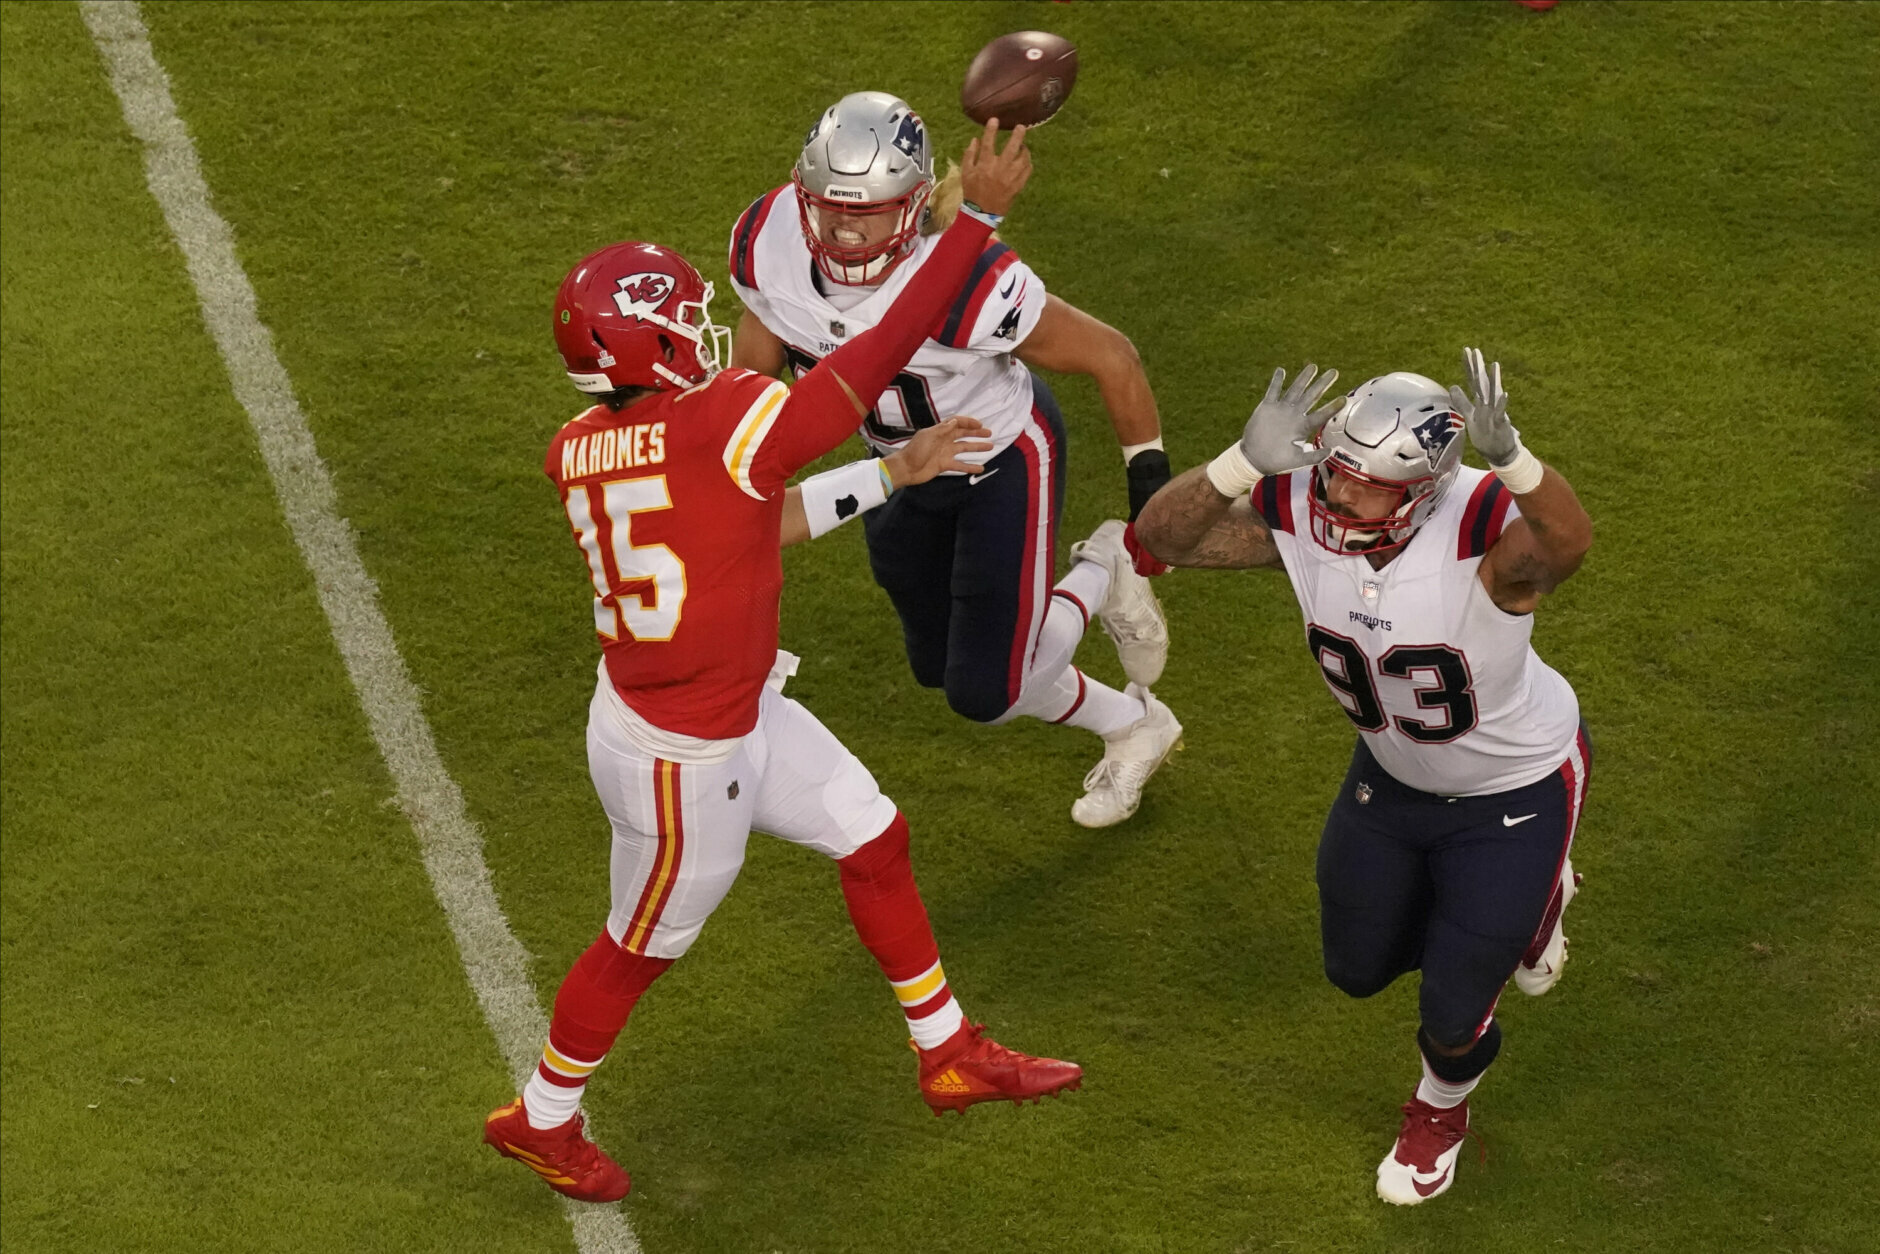 <p><b><i>Patriots 10</i></b><br />
<b><i>Chiefs 26</i></b></p>
<p>Perhaps <a href="https://profootballtalk.nbcsports.com/2020/09/29/do-not-mess-with-patrick-mahomes-mom/">Patrick Mahomes&#8217; mom doesn&#8217;t like you shortening his name</a> because it&#8217;s also short for Patriots &#8212; as in, the only team to beat Mahomes twice and the only team to hold his Chiefs without a touchdown in the first half of a game. But without a QB, the Patriots had no shot of leaving Kansas City with a win. Consider this a glimpse of what football season in New England would look like if they weren&#8217;t gift wrapped Cam Newton.</p>
